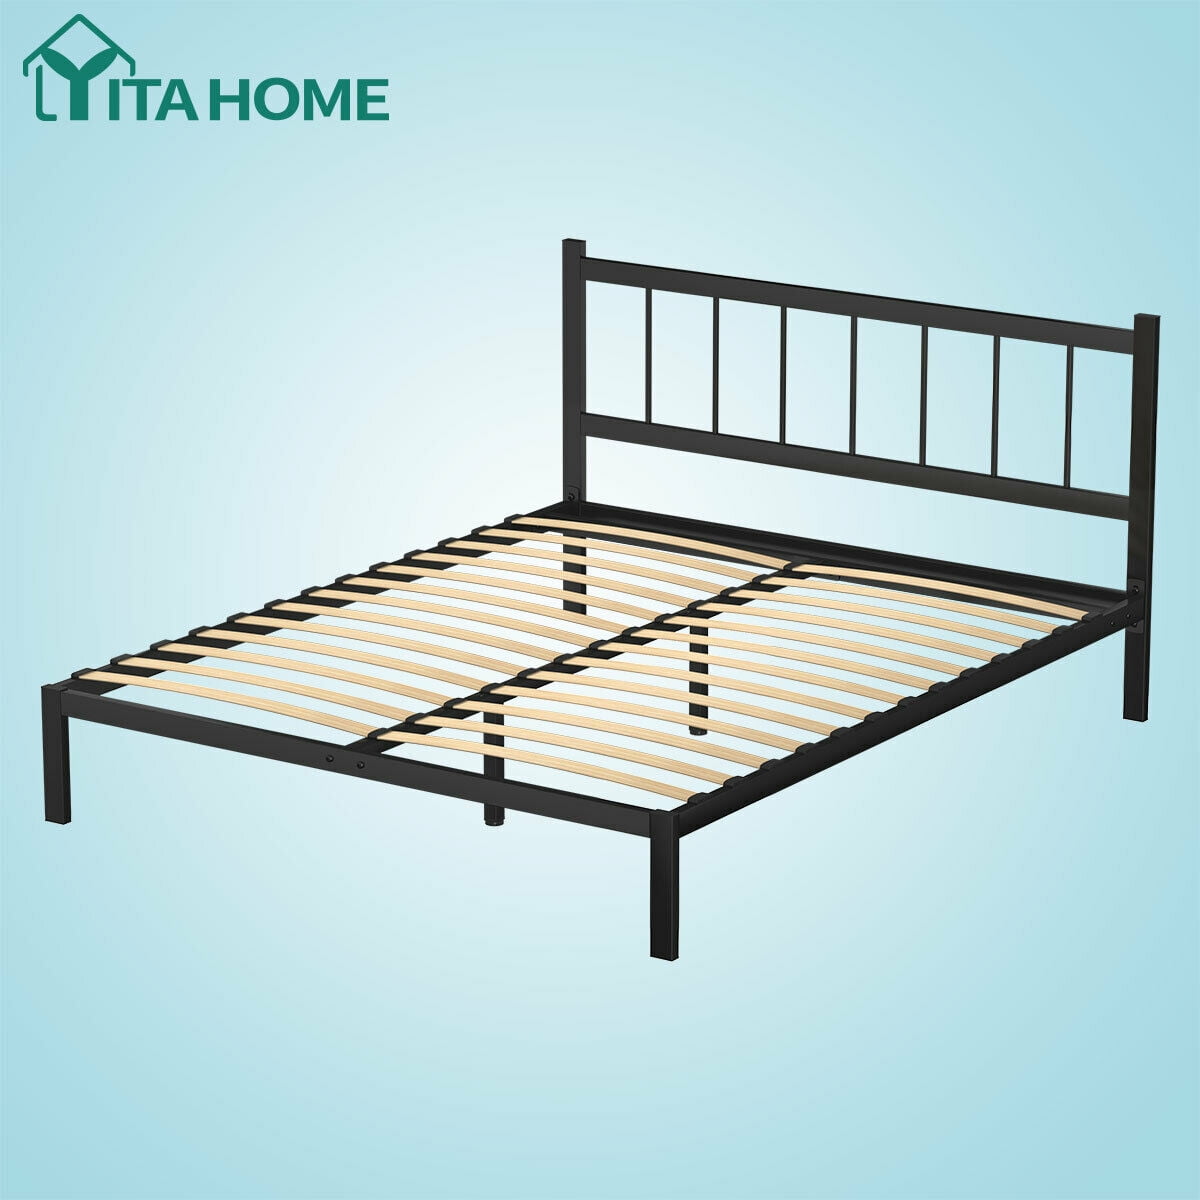 Details about   YITAHOME Queen Size Platform Bed Frame Mattress Foundation with Headboard Wood 